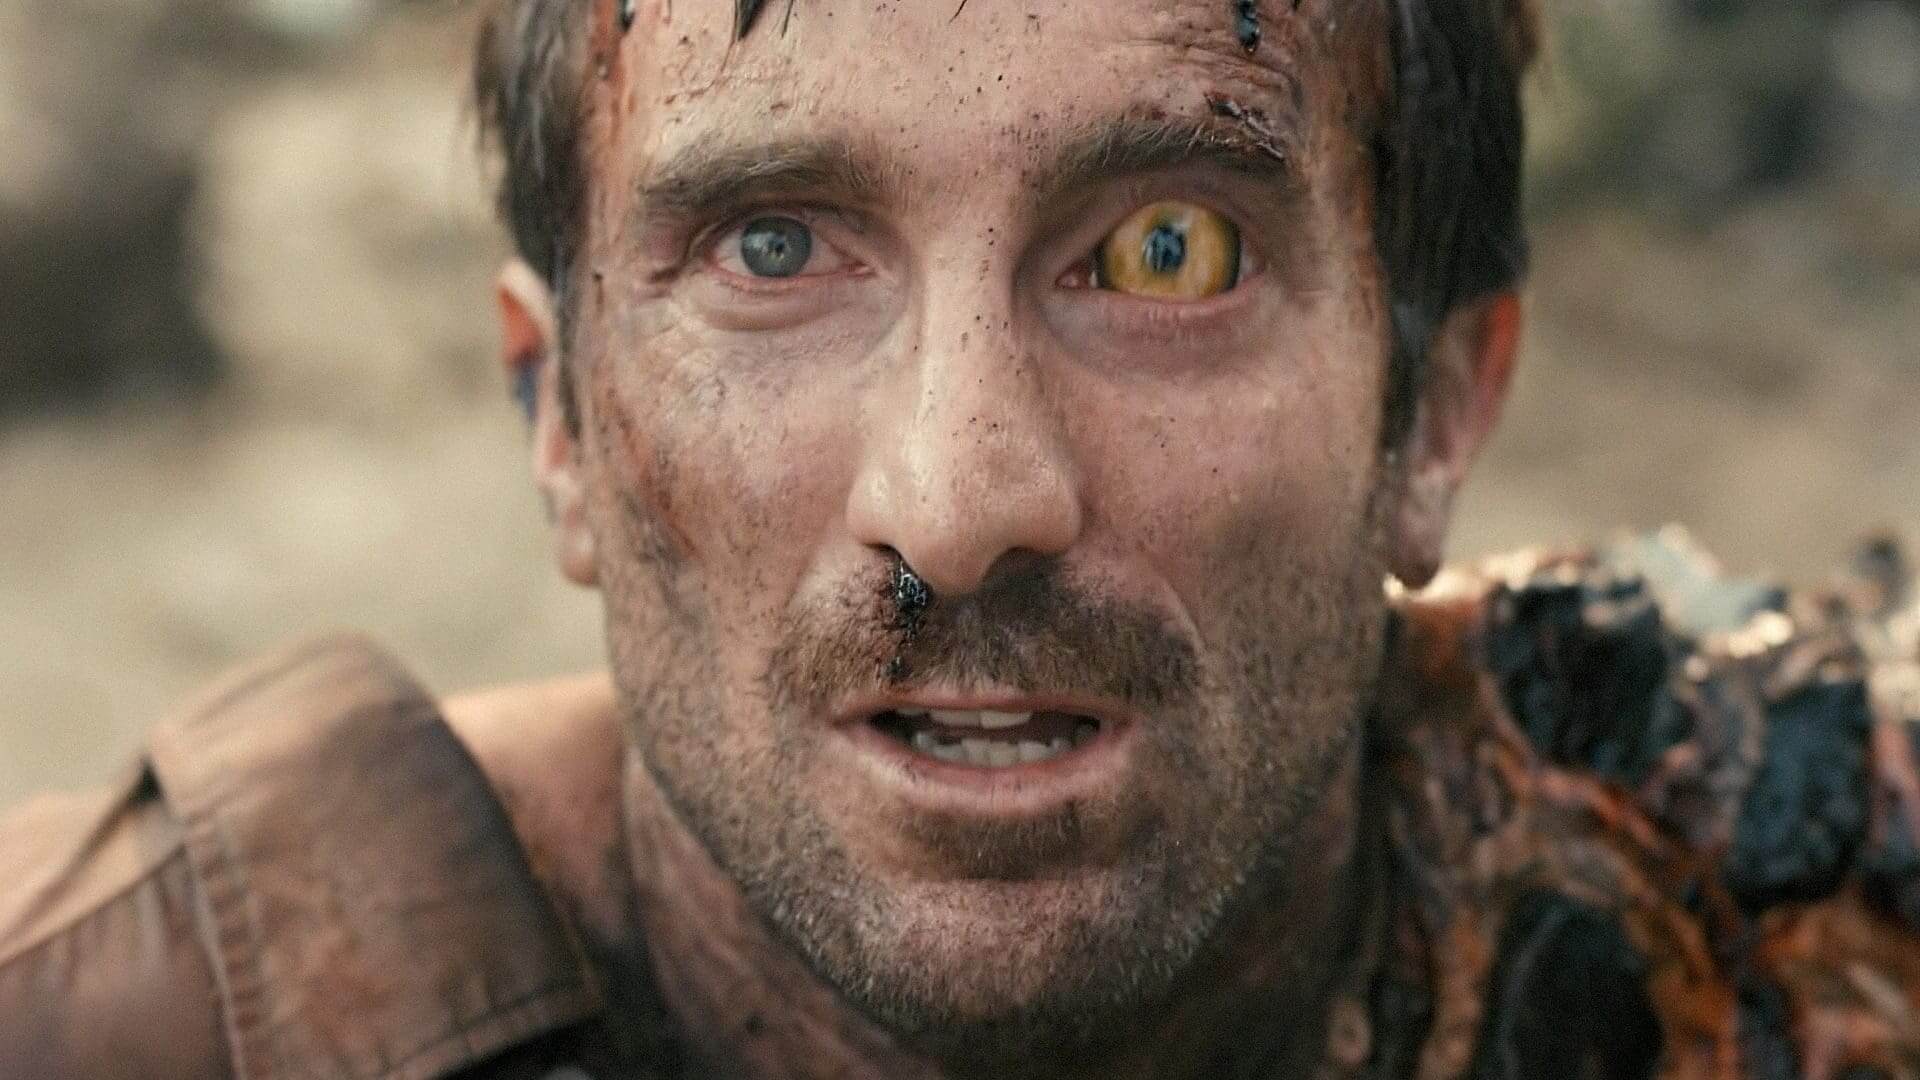 District 9 (2009) dystopian horror movies